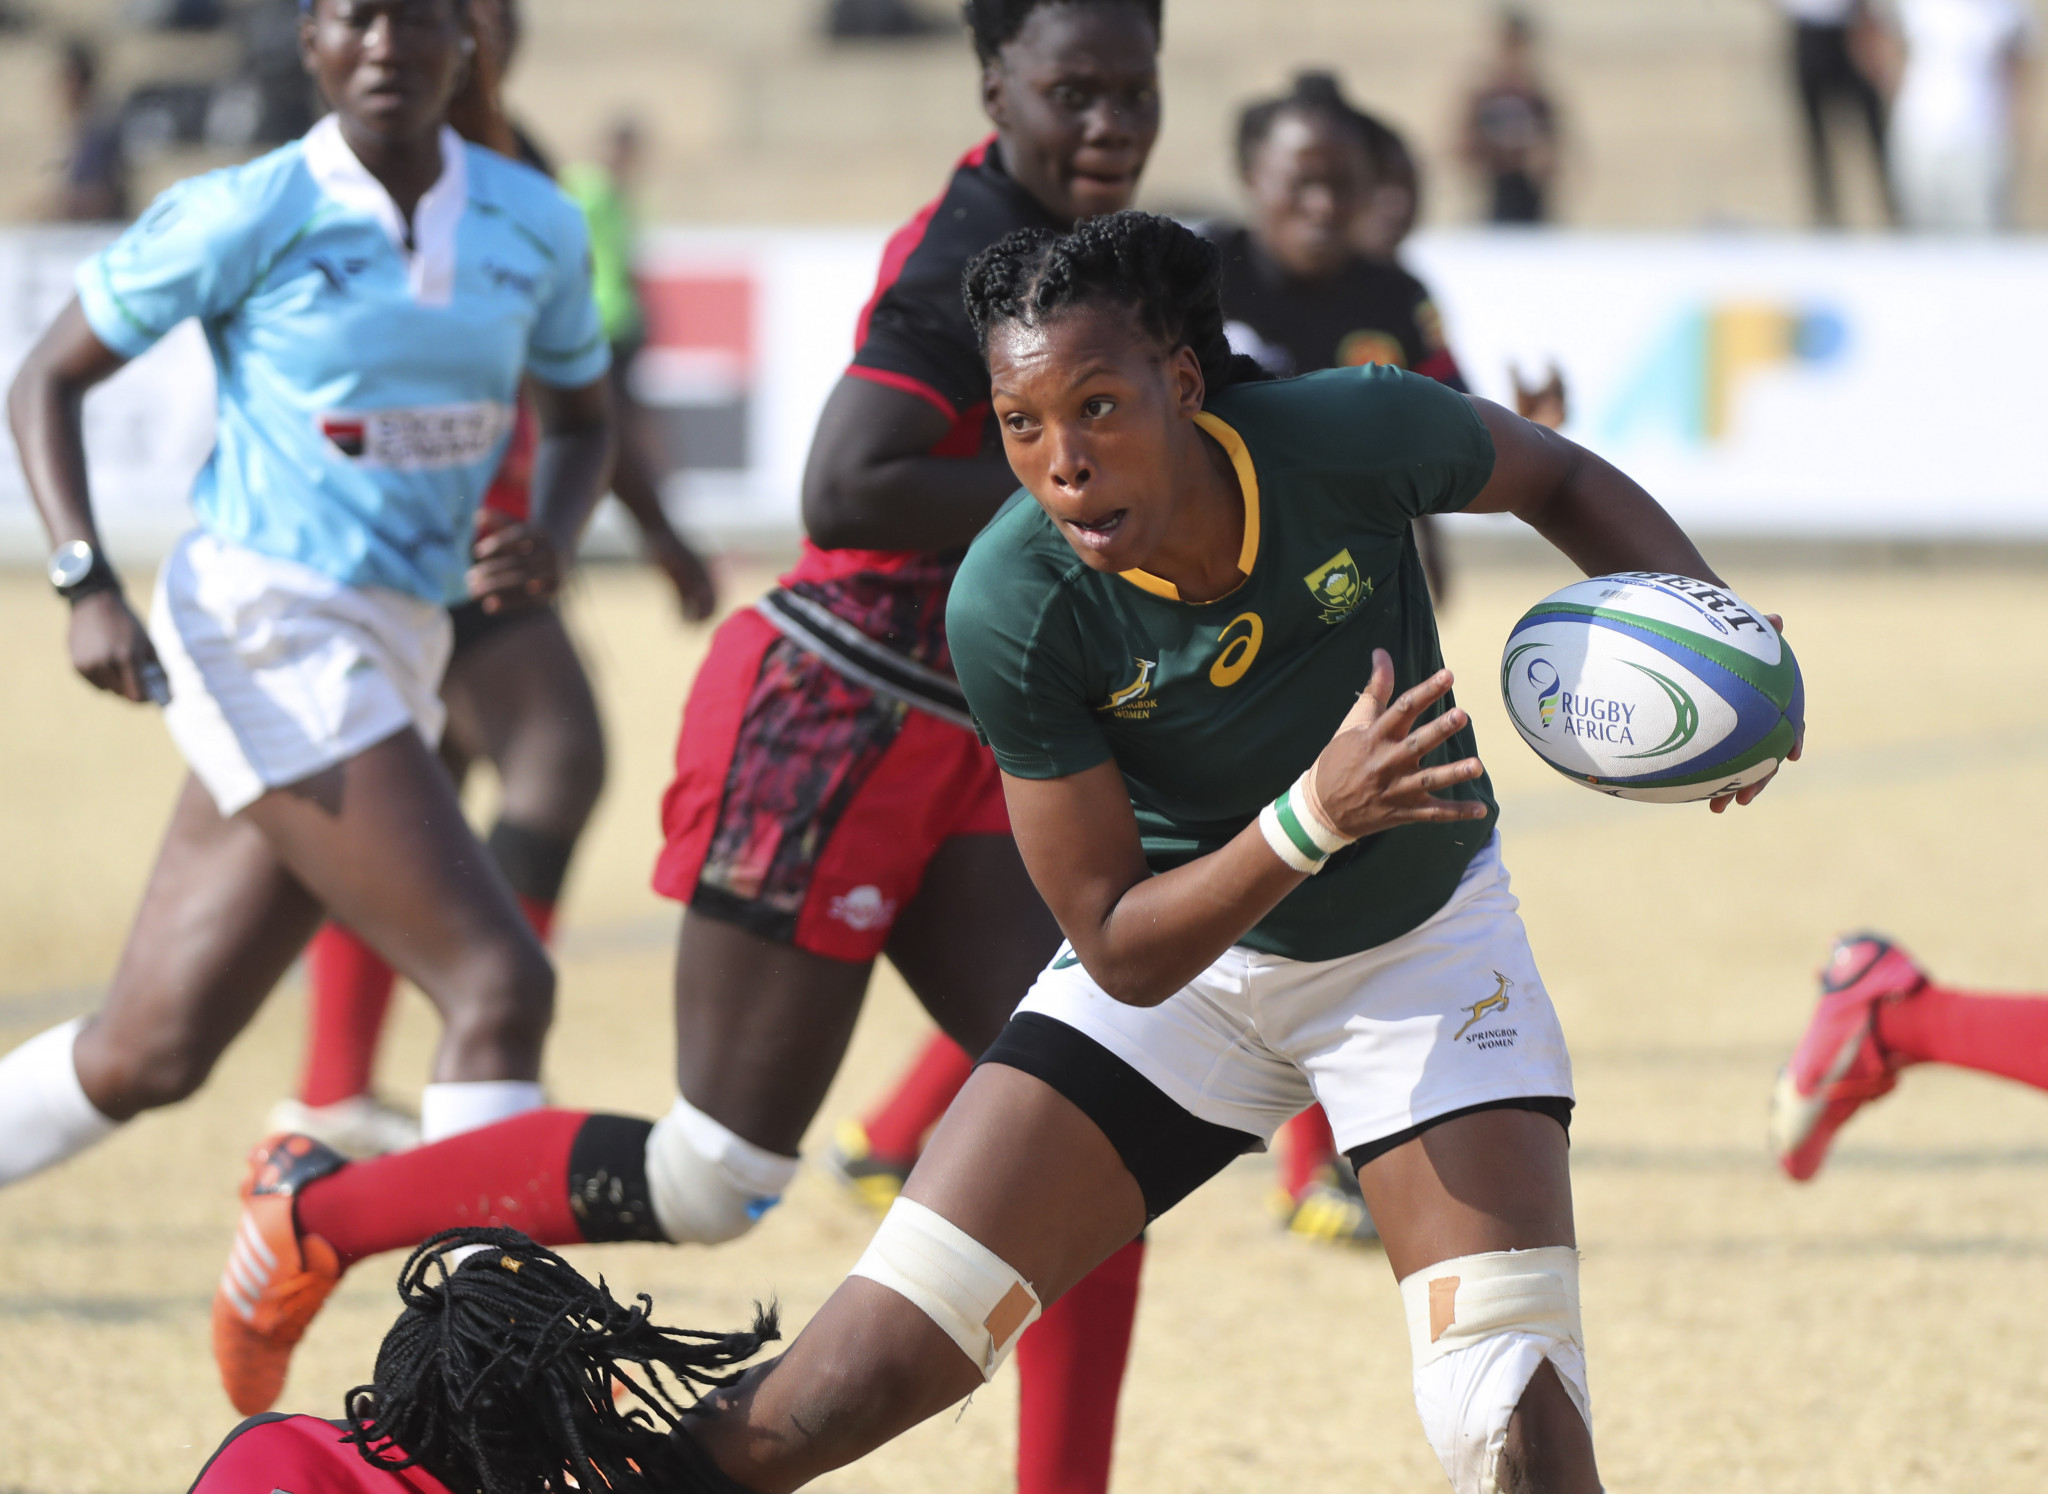 South Africa triumphed at the 2019 Rugby Africa Cup, qualifying for the 2021 Rugby World Cup ©Rugby Africa 